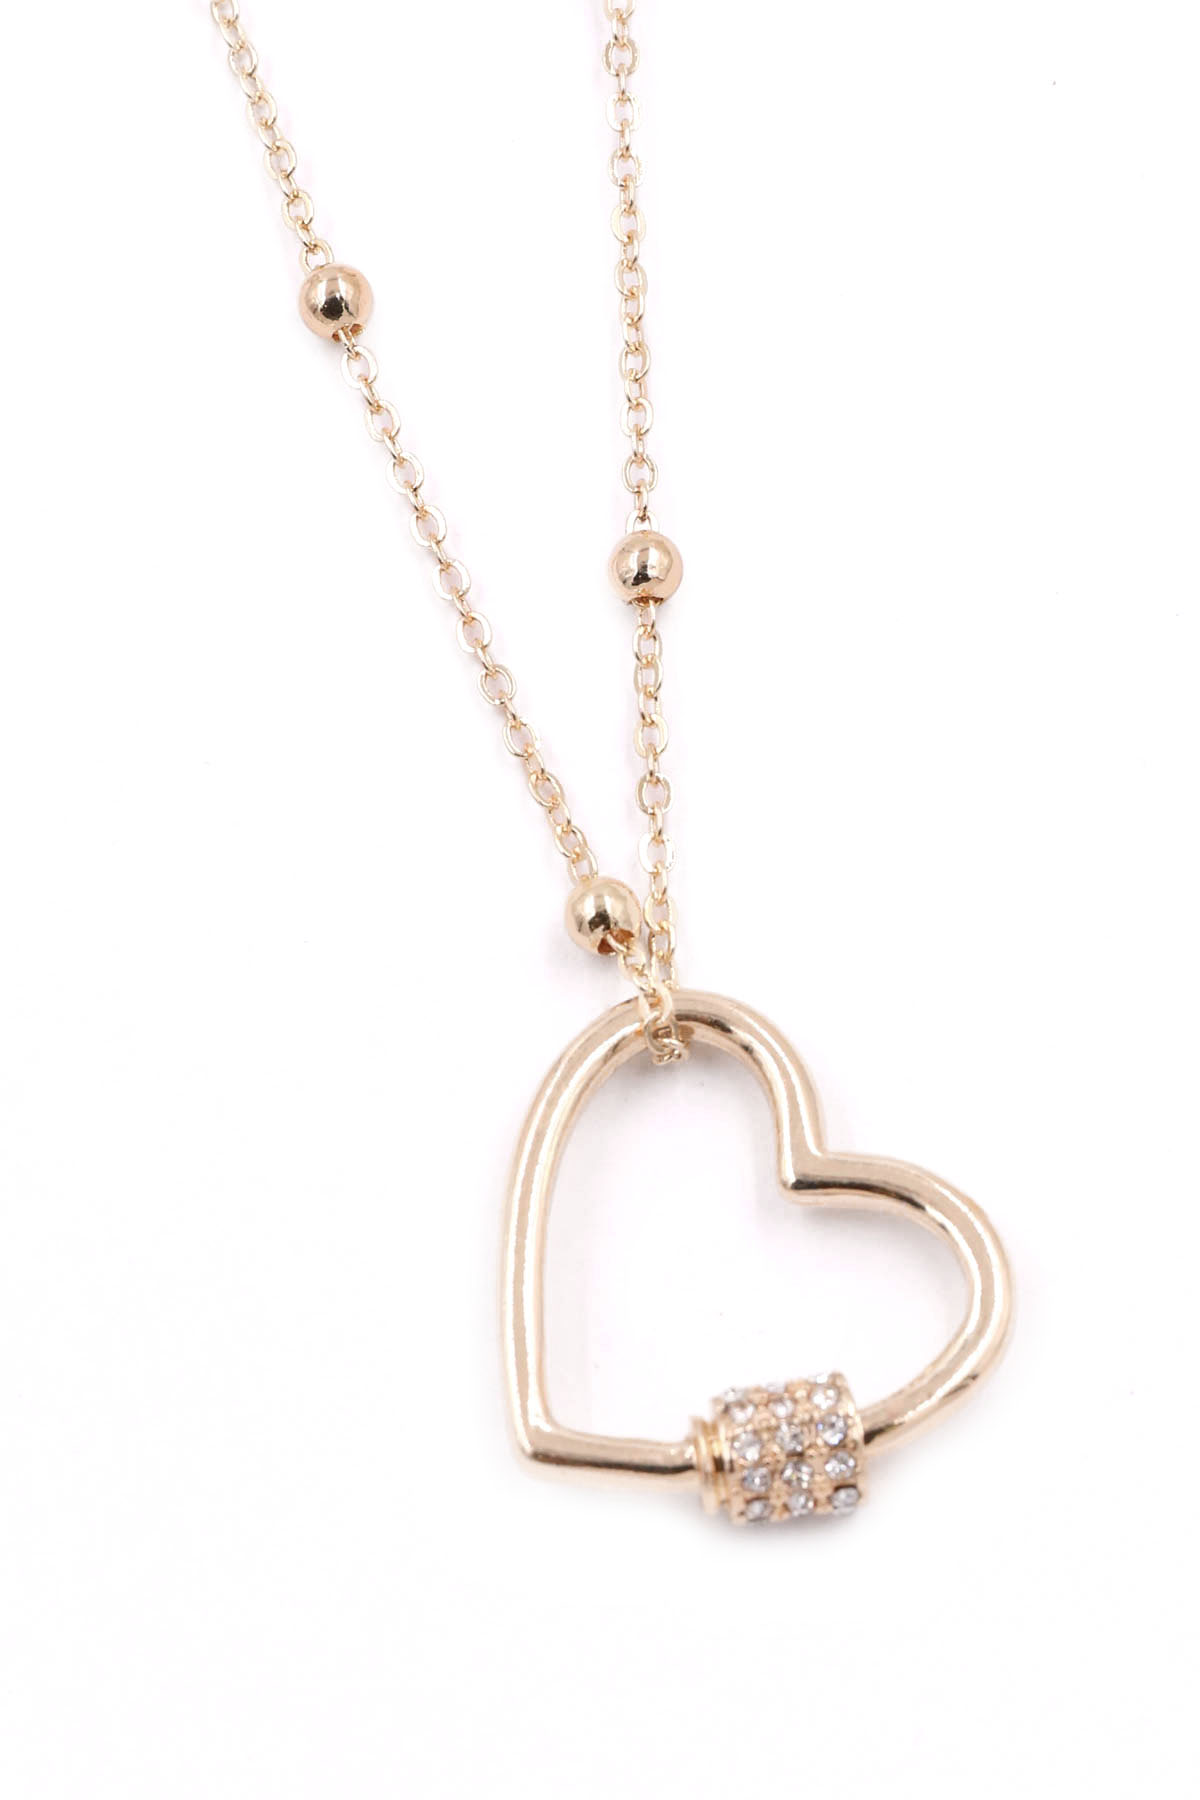 GOLD Heart Necklace - Necklaces